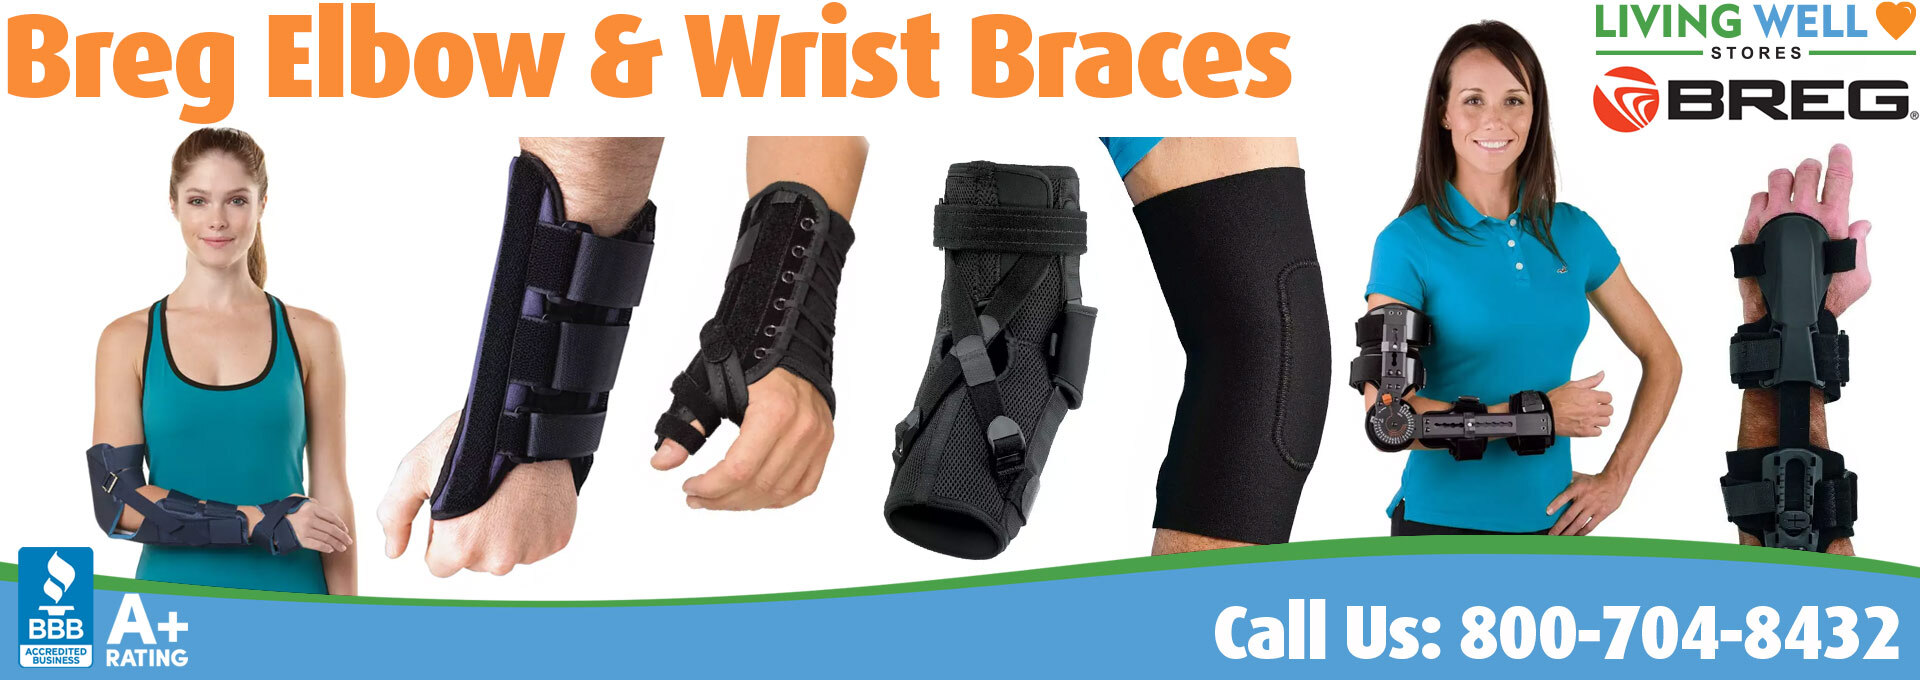 Living Well Stores: The Best Elbow and Wrist Braces Made by Breg